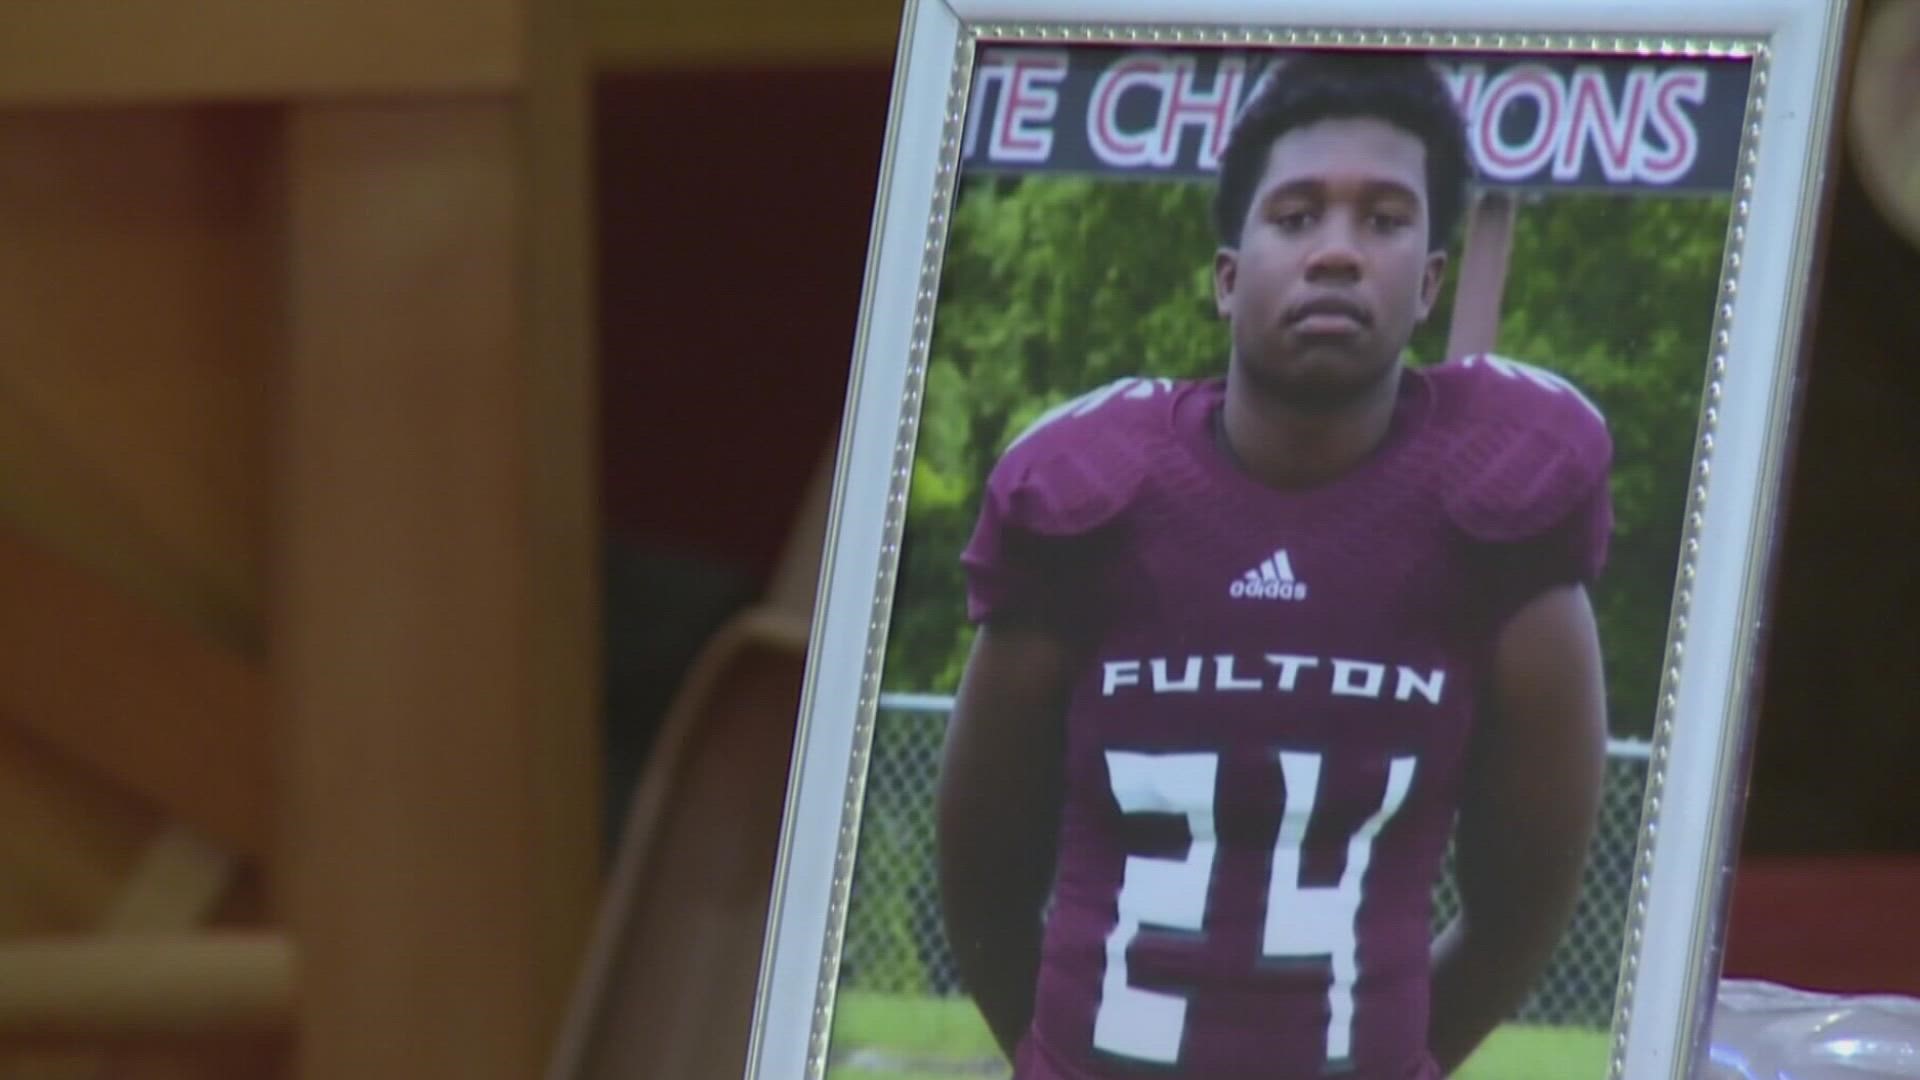 The game is in honor of former player Zaevion Dobson. He was shot and killed in December 2015 while shielding friends from gunfire.